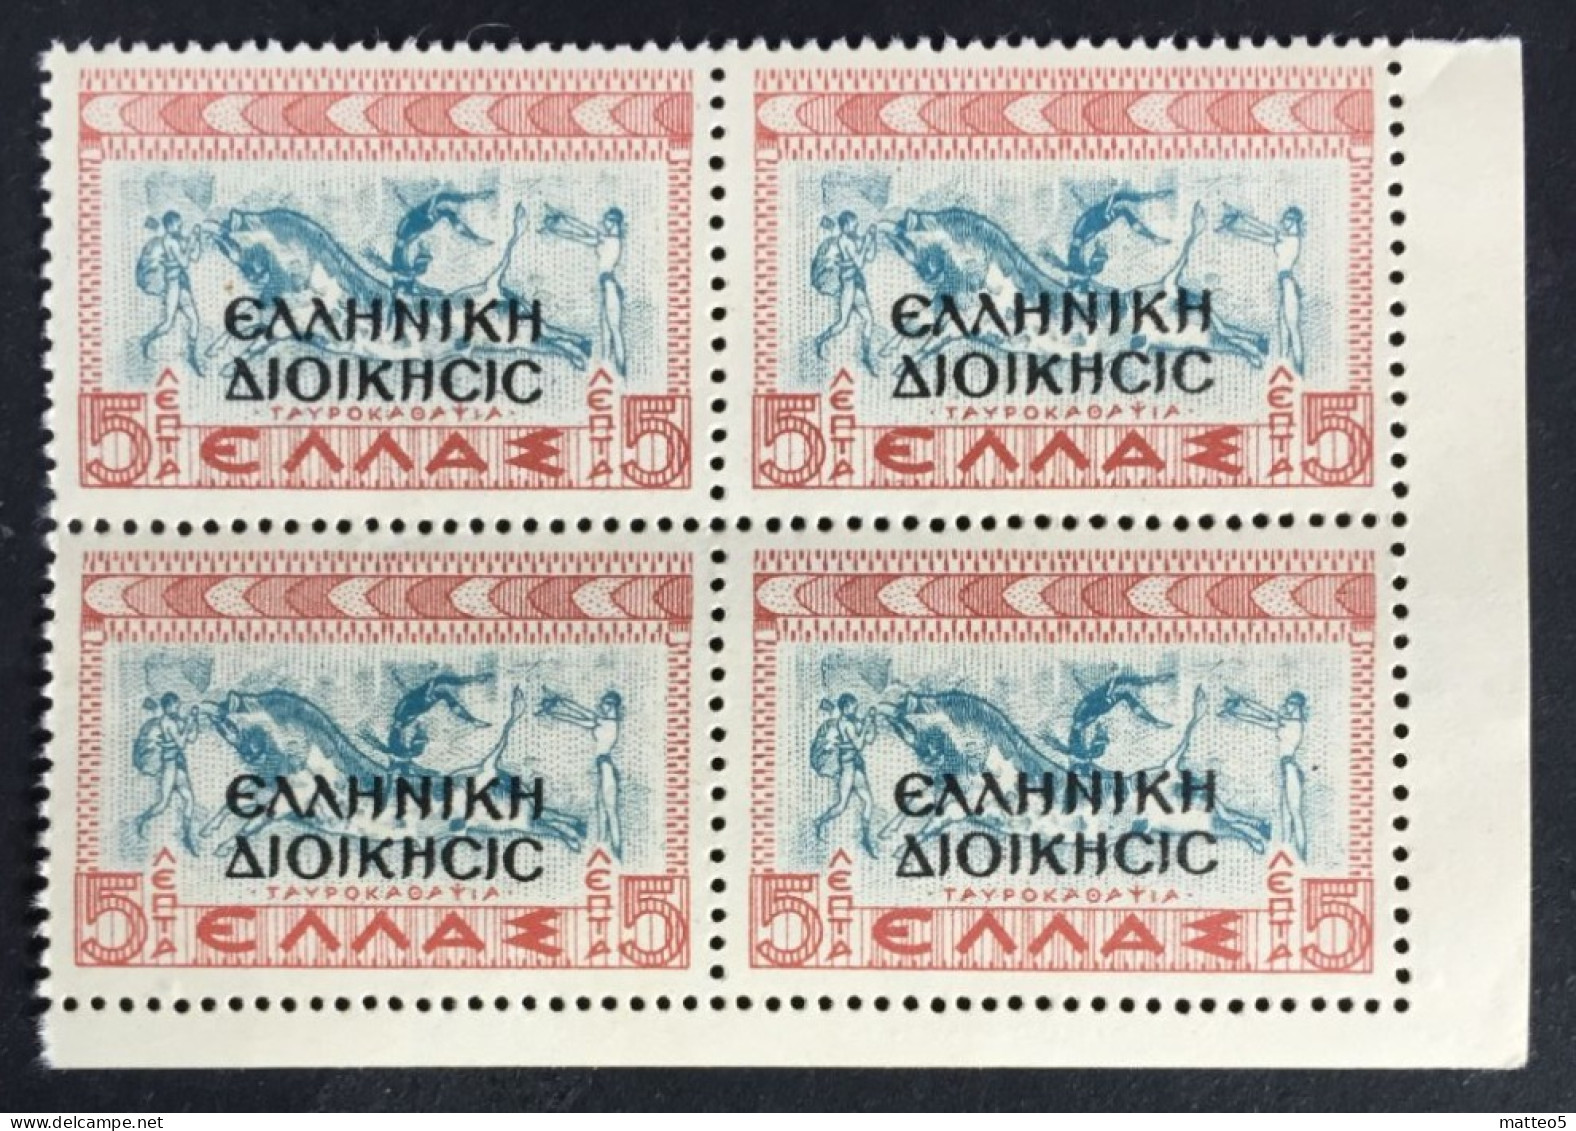 1940 - Albania - Greek Occupation In WWII - The Black Overprint Hellenic Admin - 4 Stamps - F2 - Occup. Greca: Albania